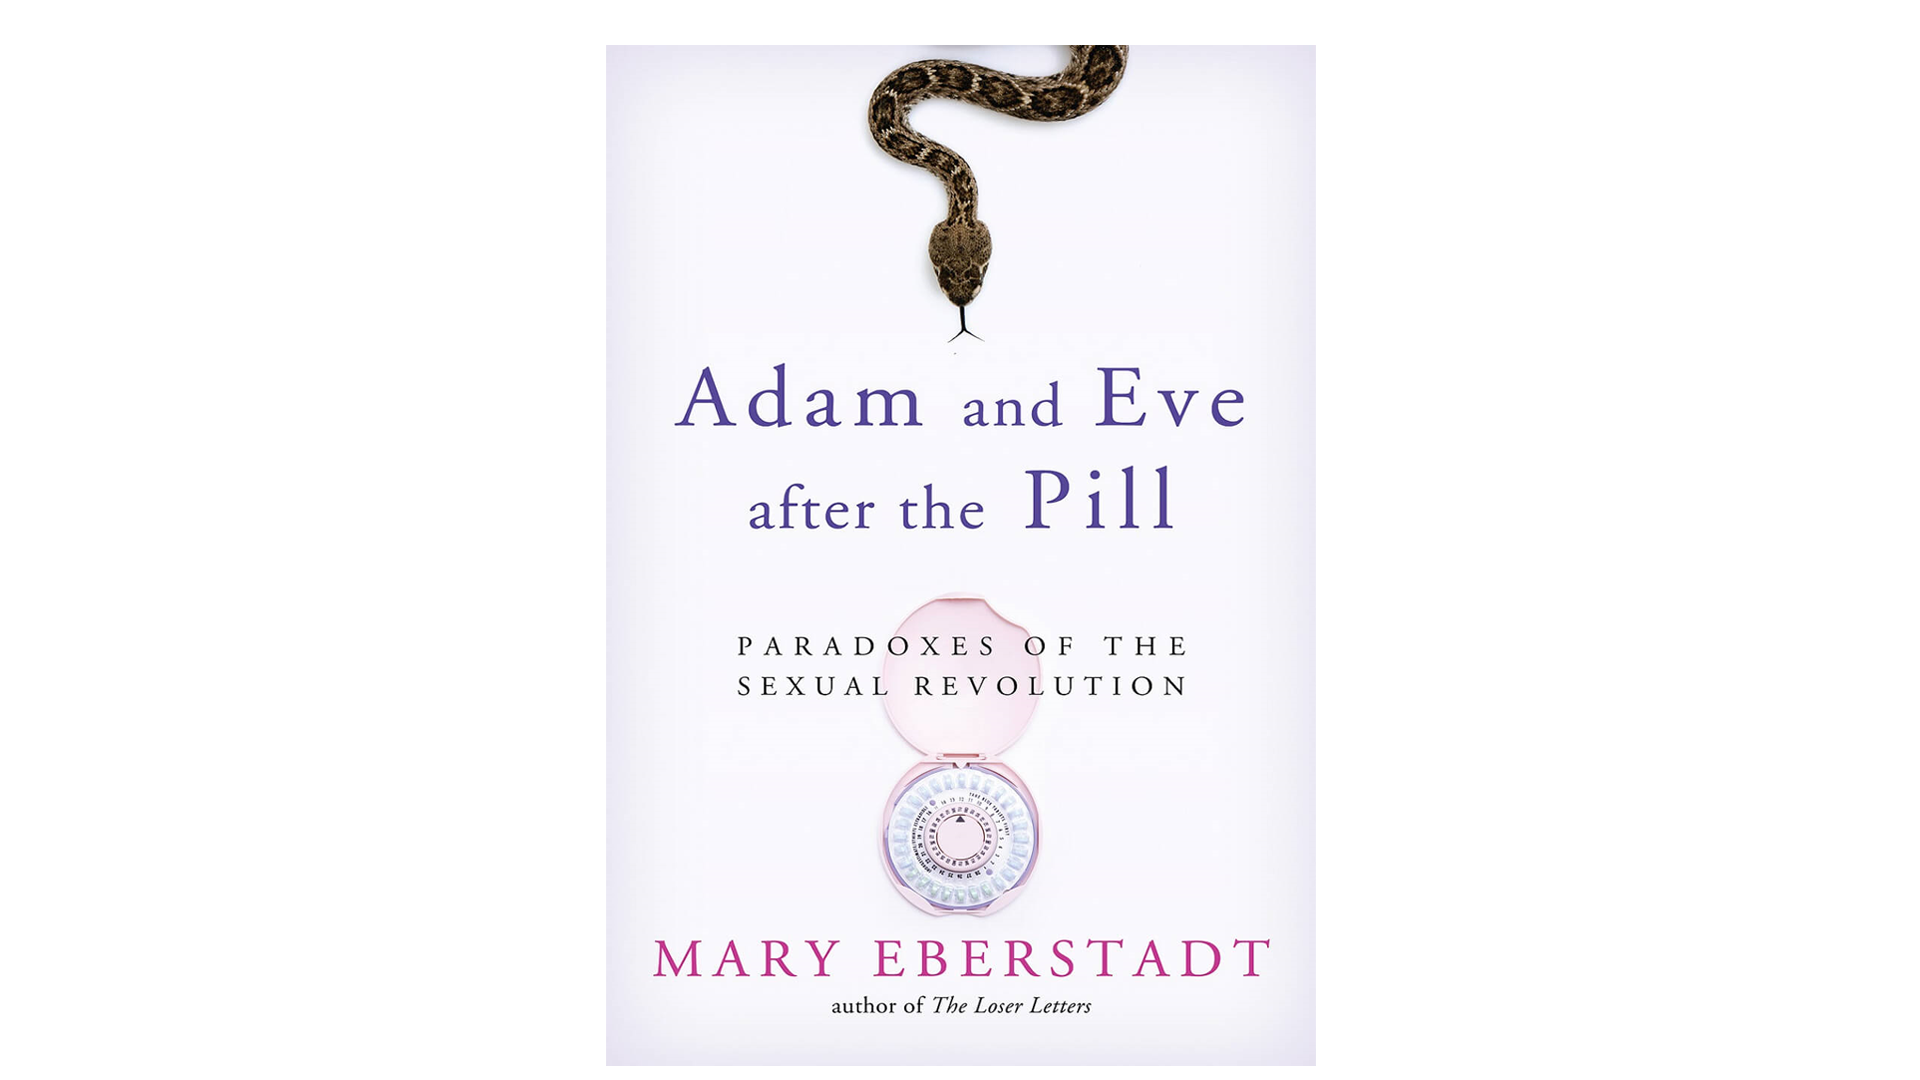 Adam and Eve After the Pill by Mary Eberstadt